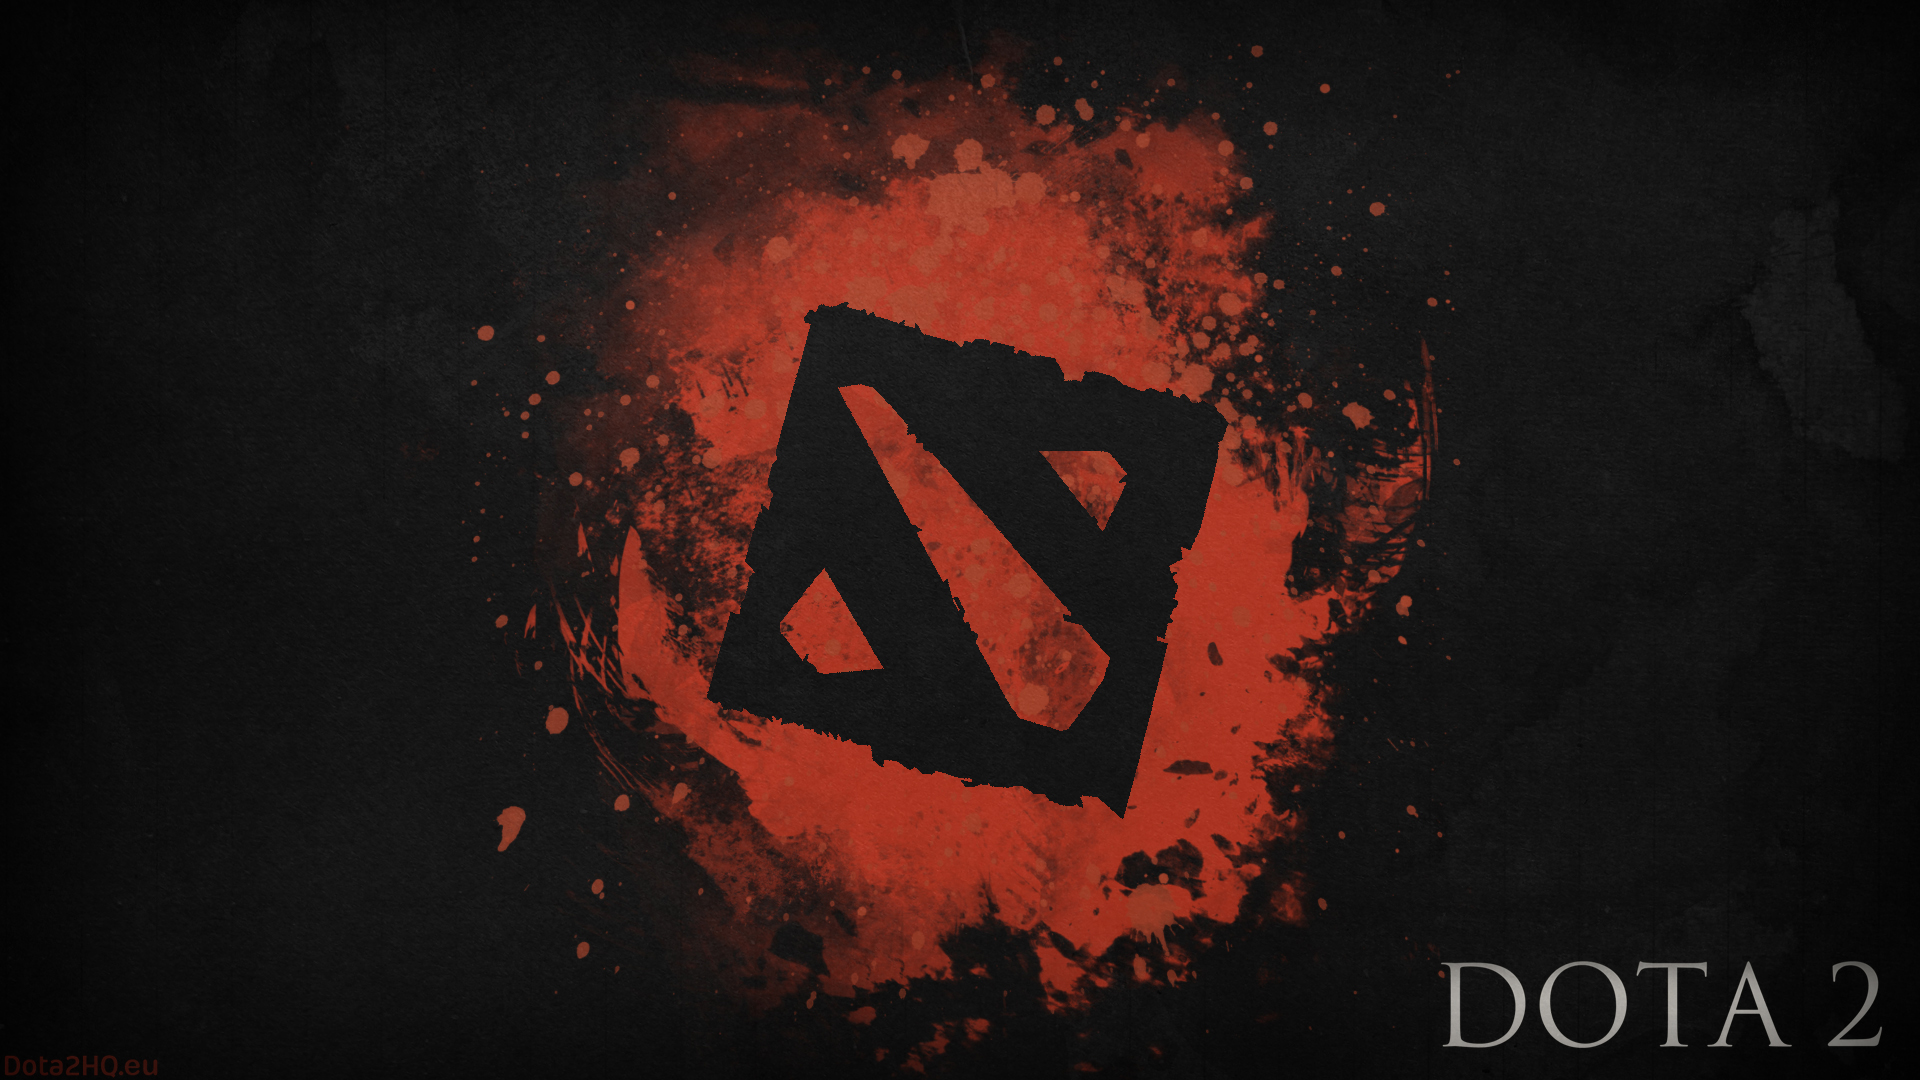 dota 2 wallpapers hd,font,red,text,logo,graphic design